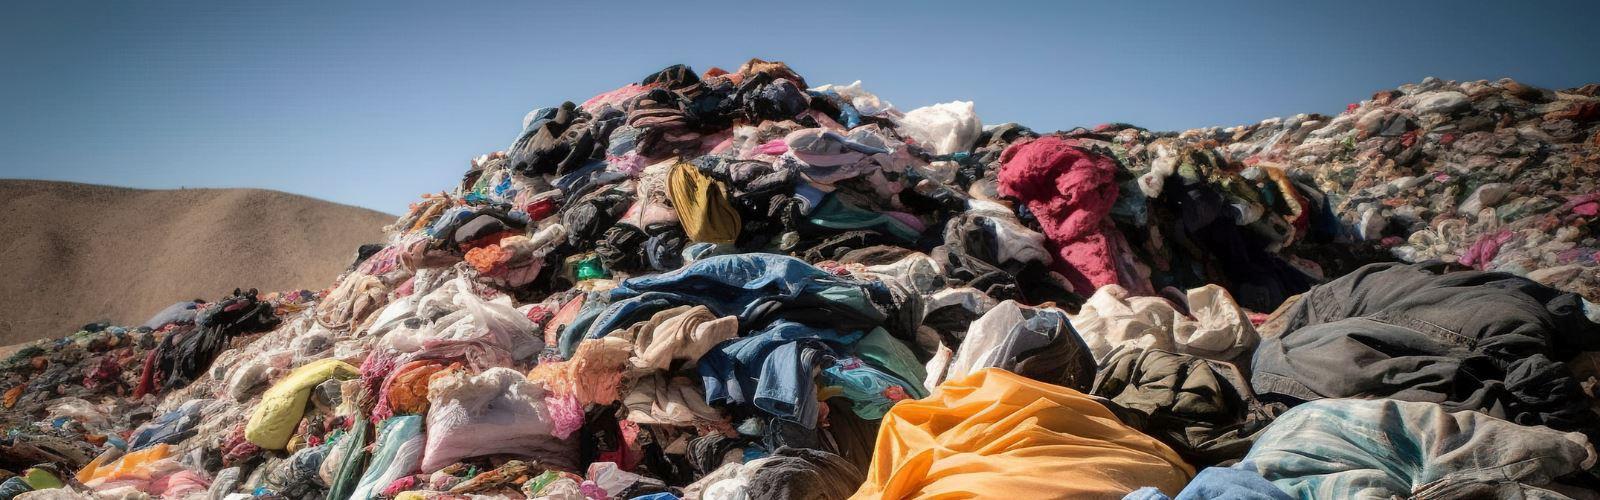 Out With the Old and In With the New: What Really Happens in the Life of Our Clothes?